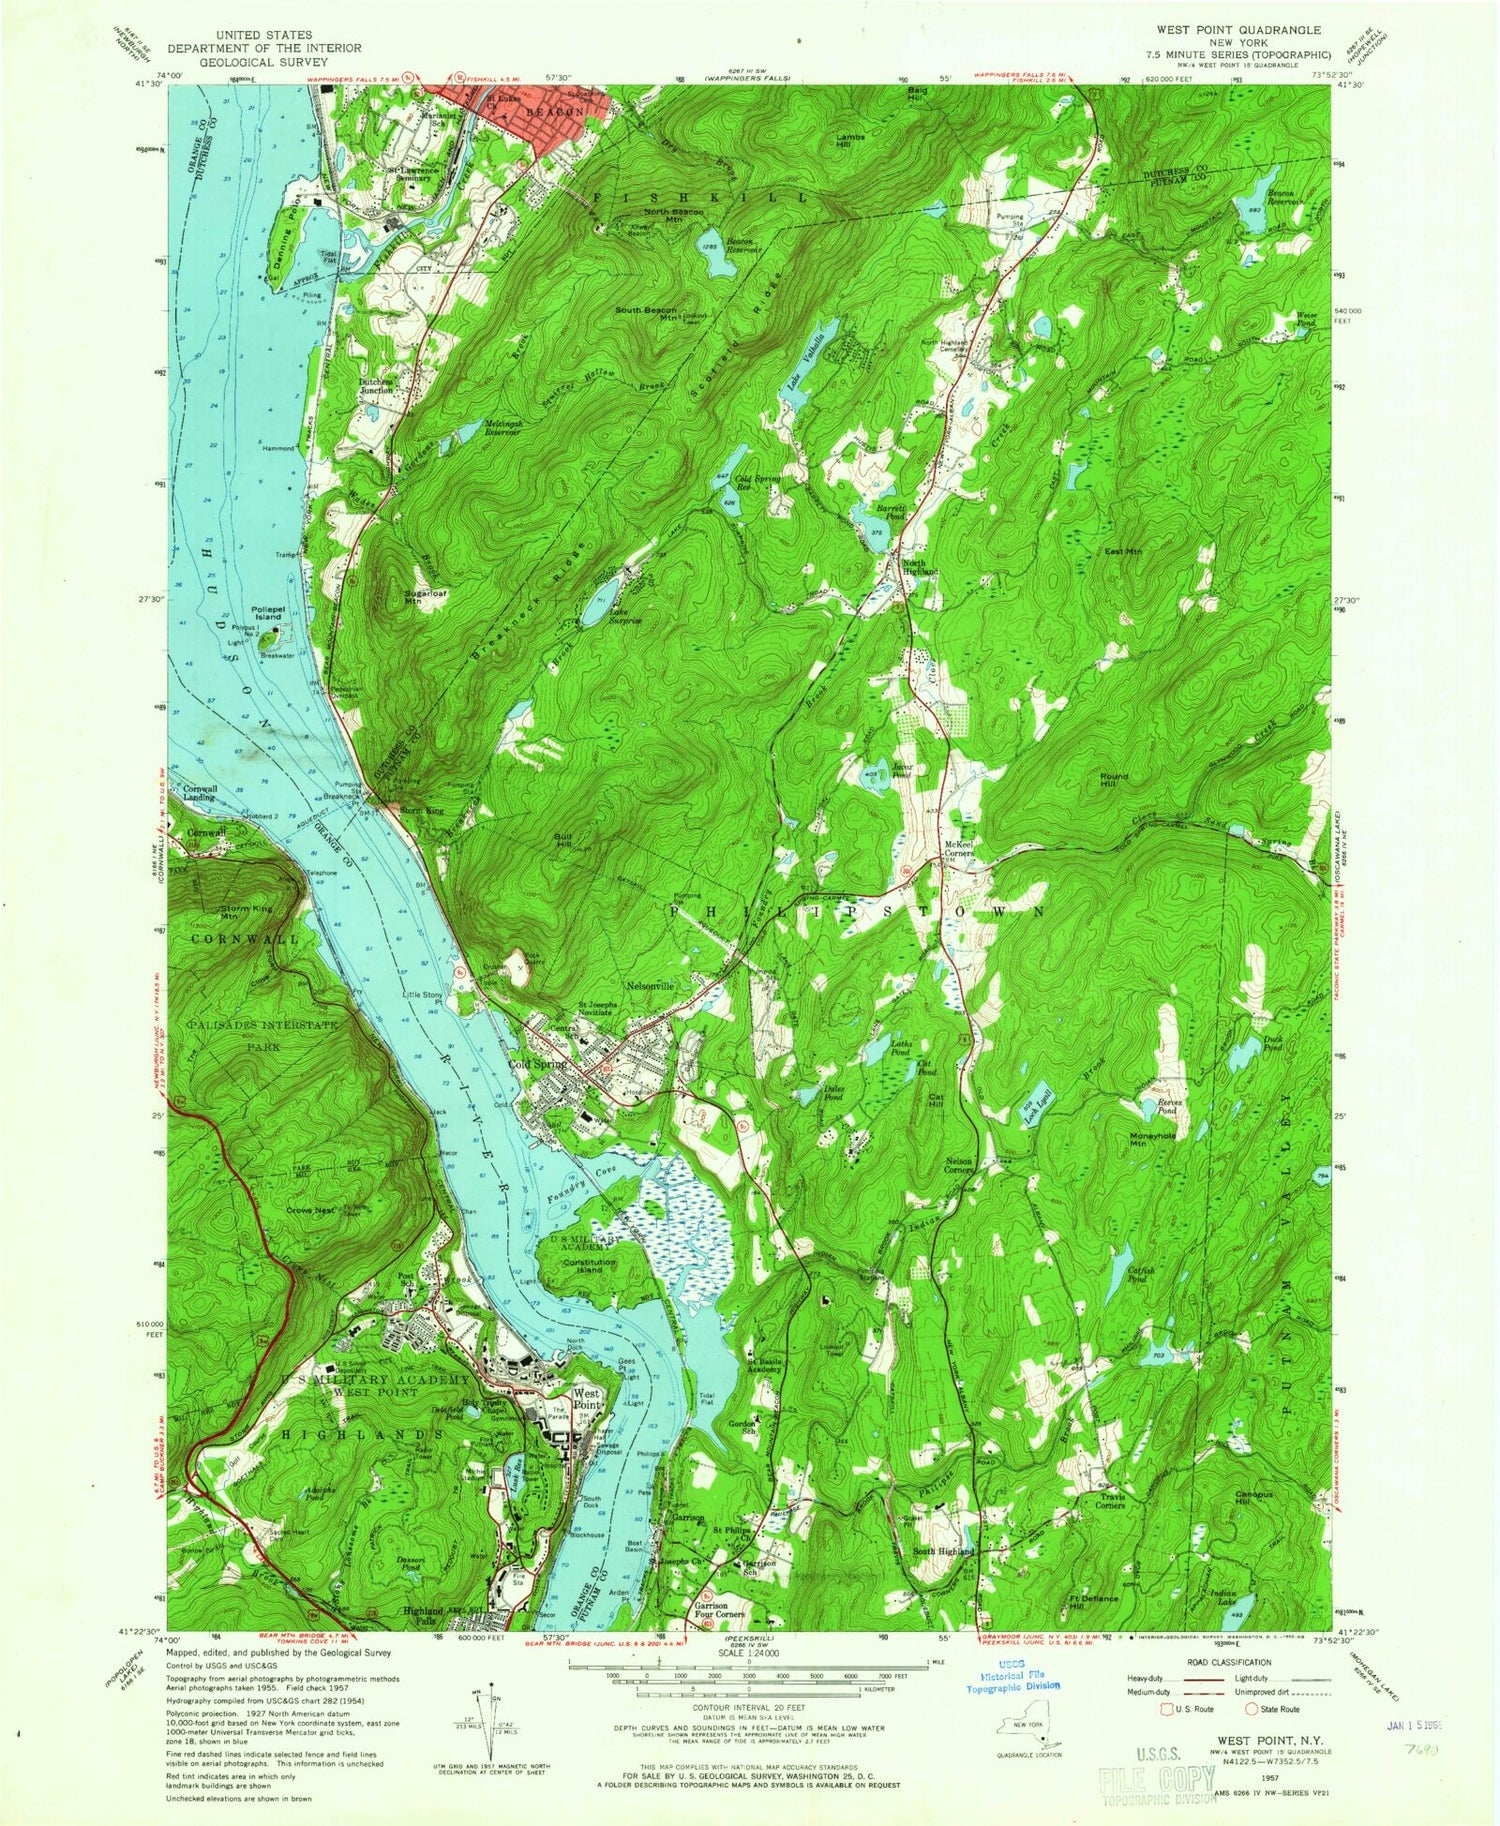 Classic USGS West Point New York 7.5'x7.5' Topo Map Image